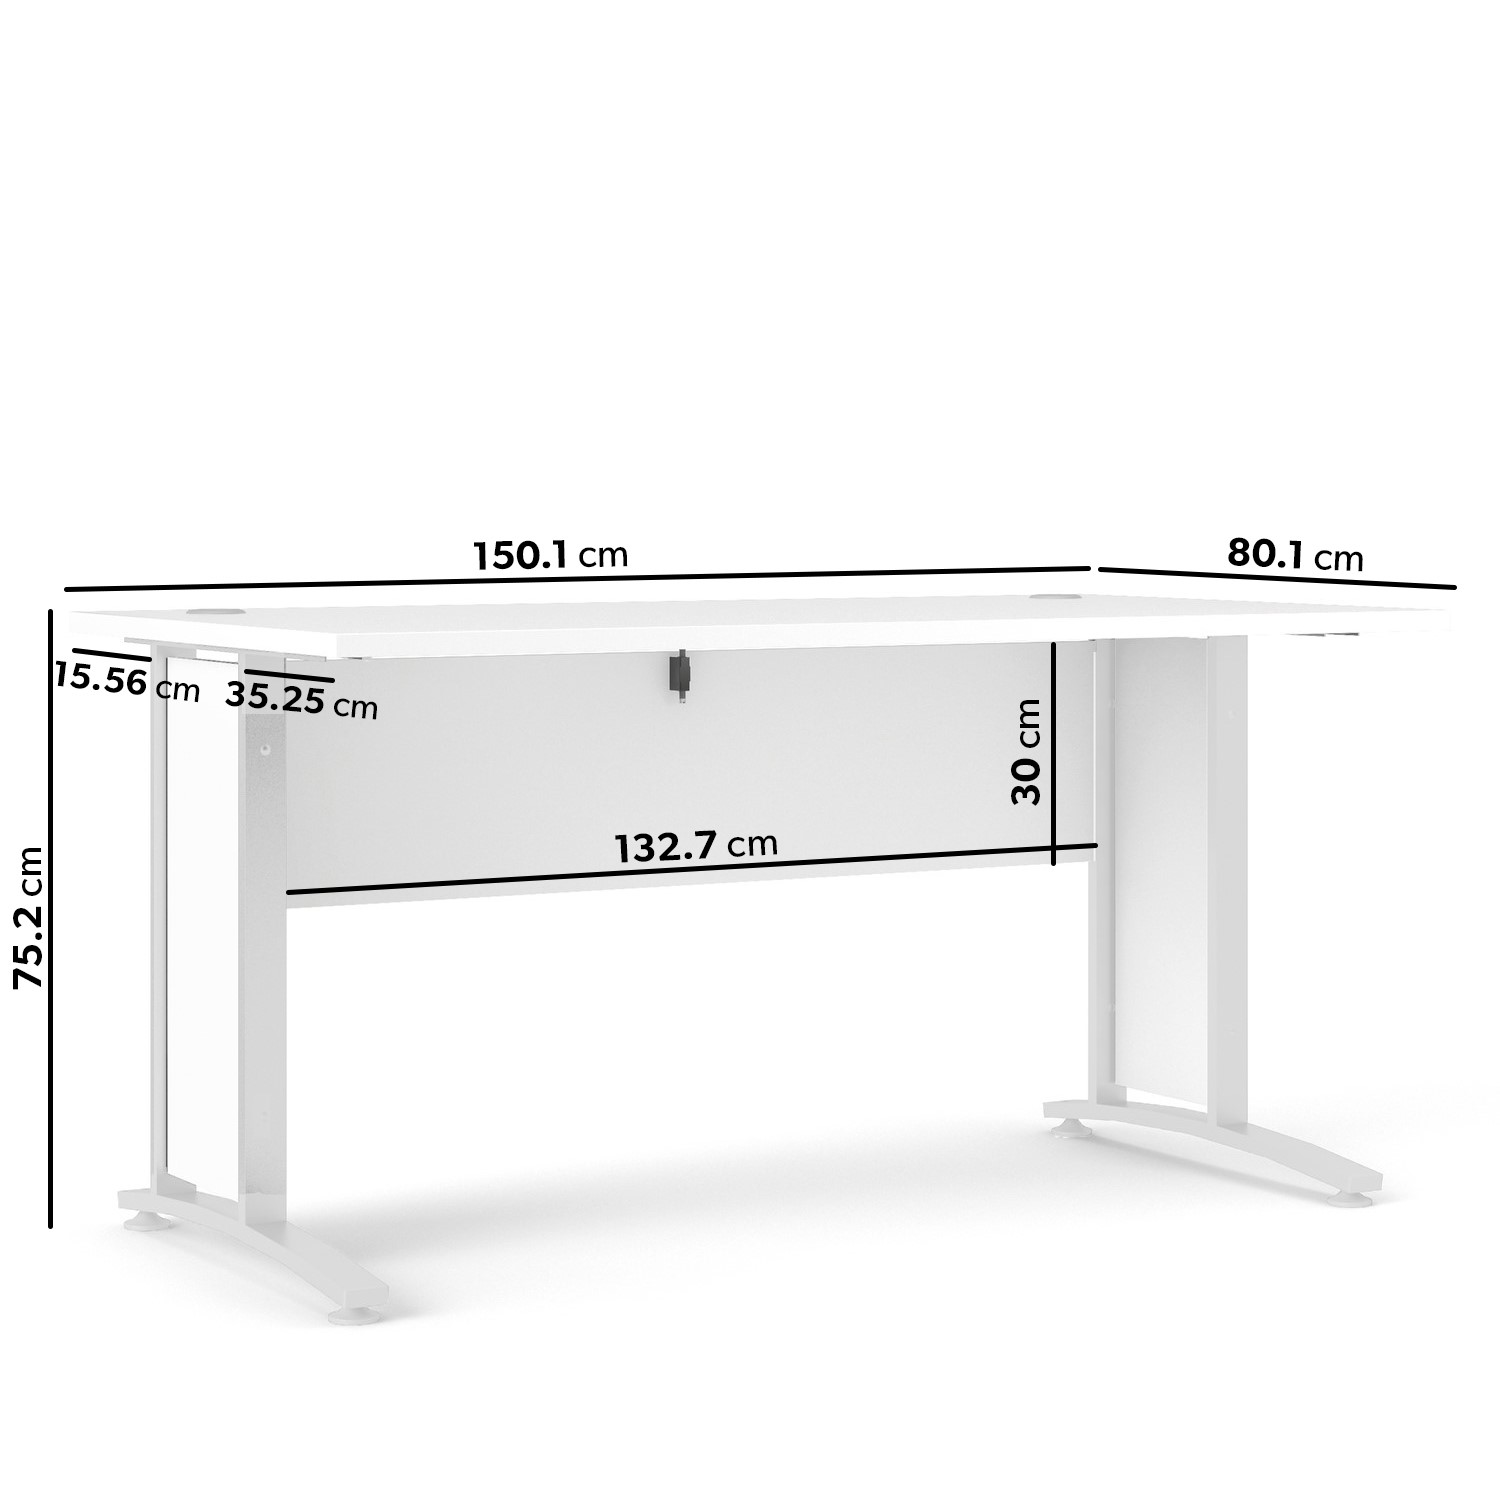 Read more about Large white office desk with white legs prima